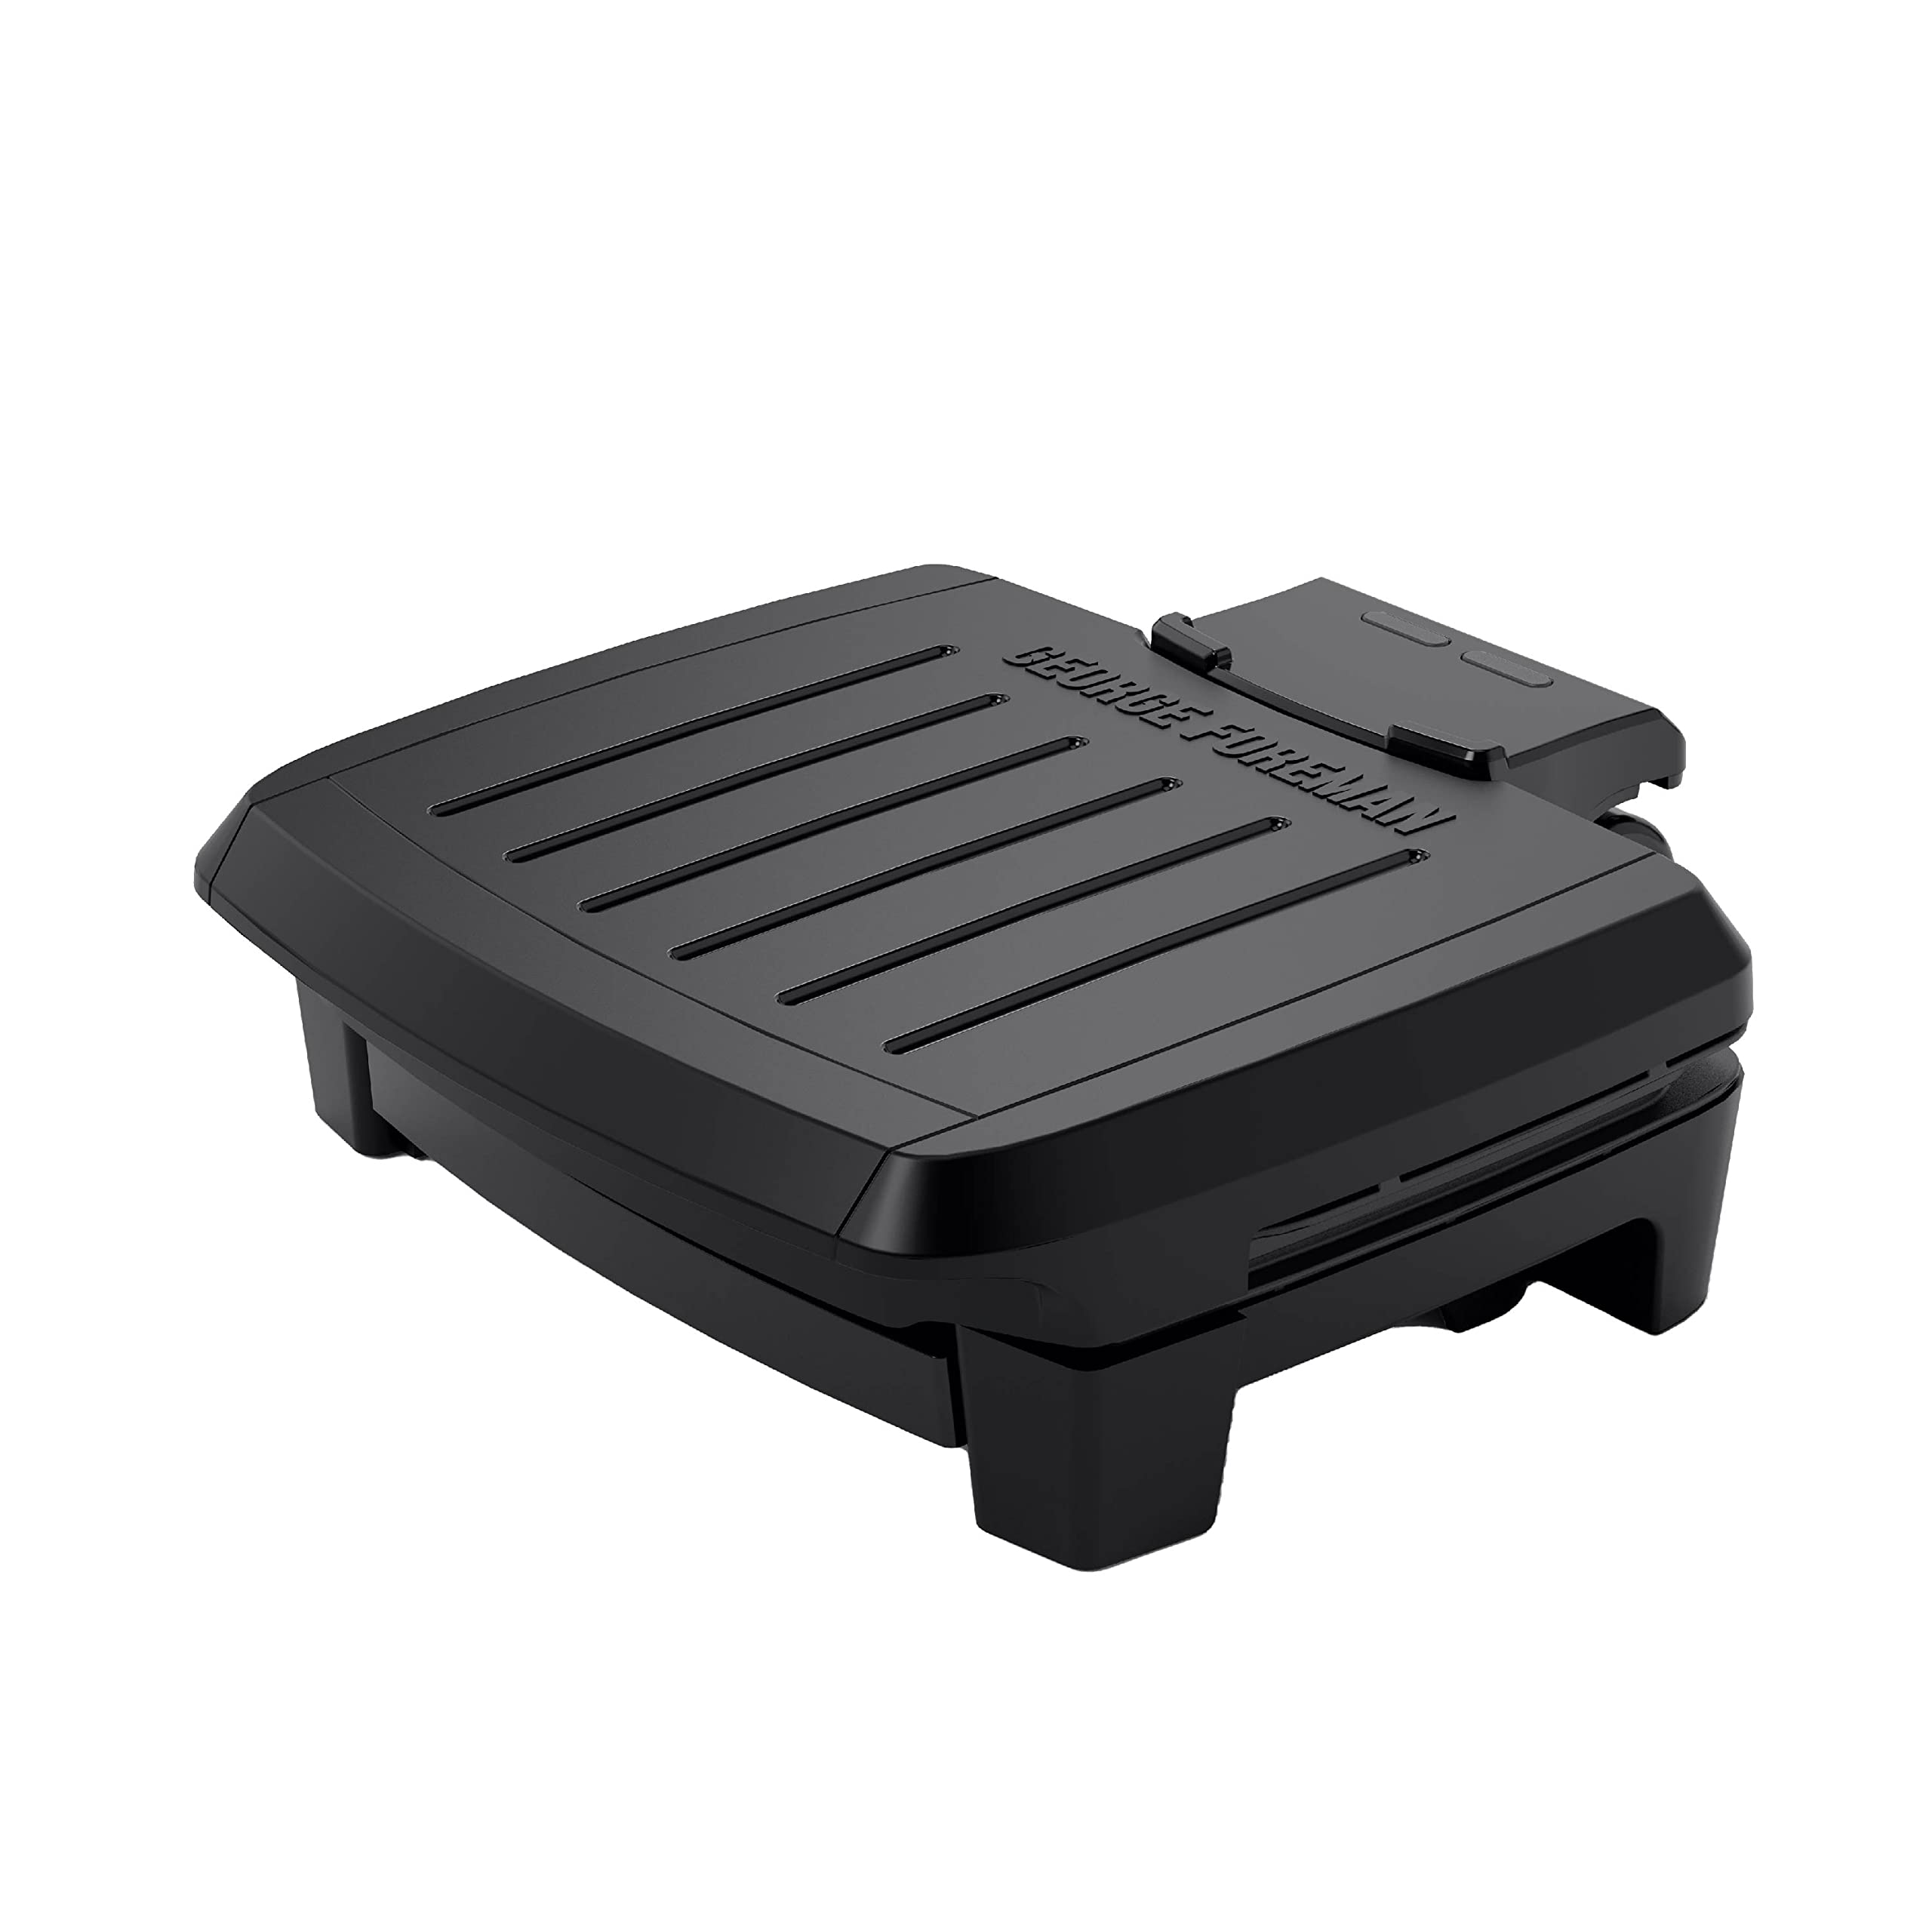 george ForemanA contact SubmersibleA grill, NEW Dishwasher Safe, Wash the Entire grill, Easy-to-clean Nonstick